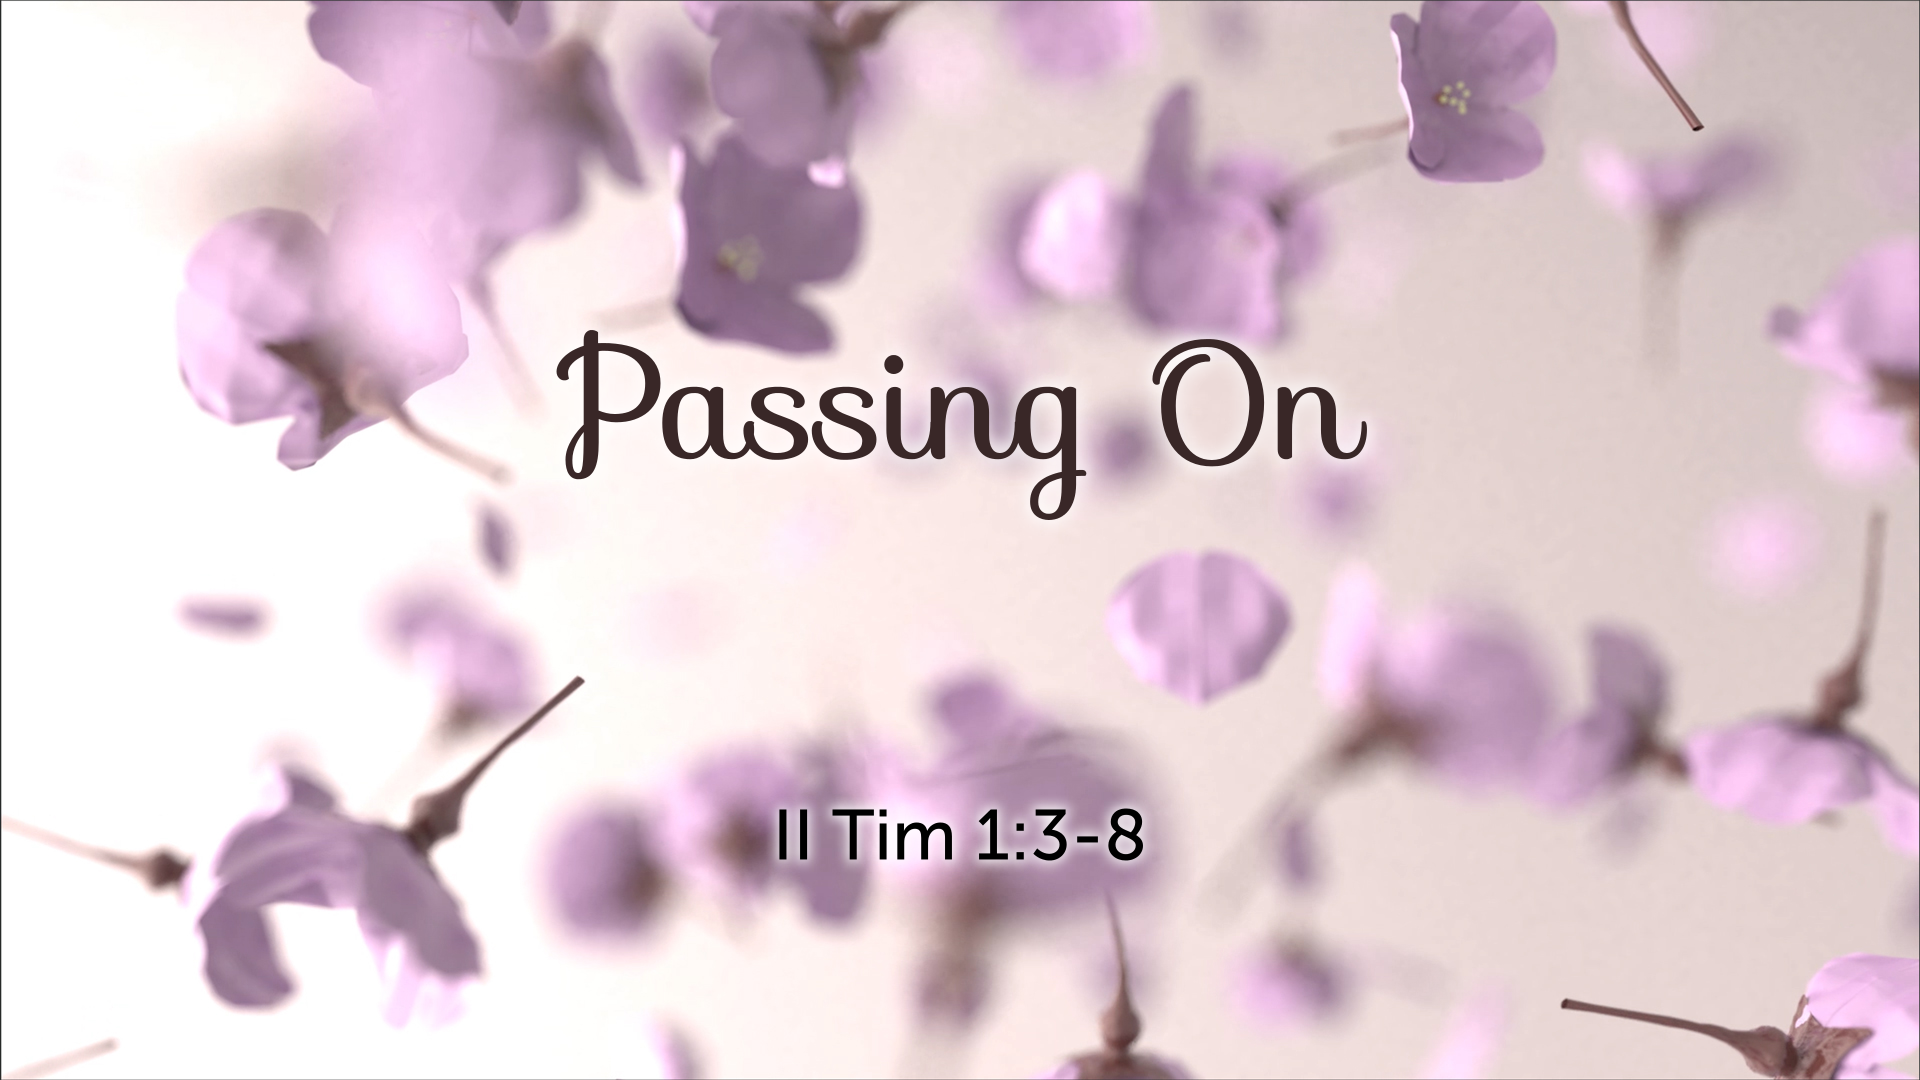 May 10, 2020 - Passing On (Video) II Tim 1:3-8